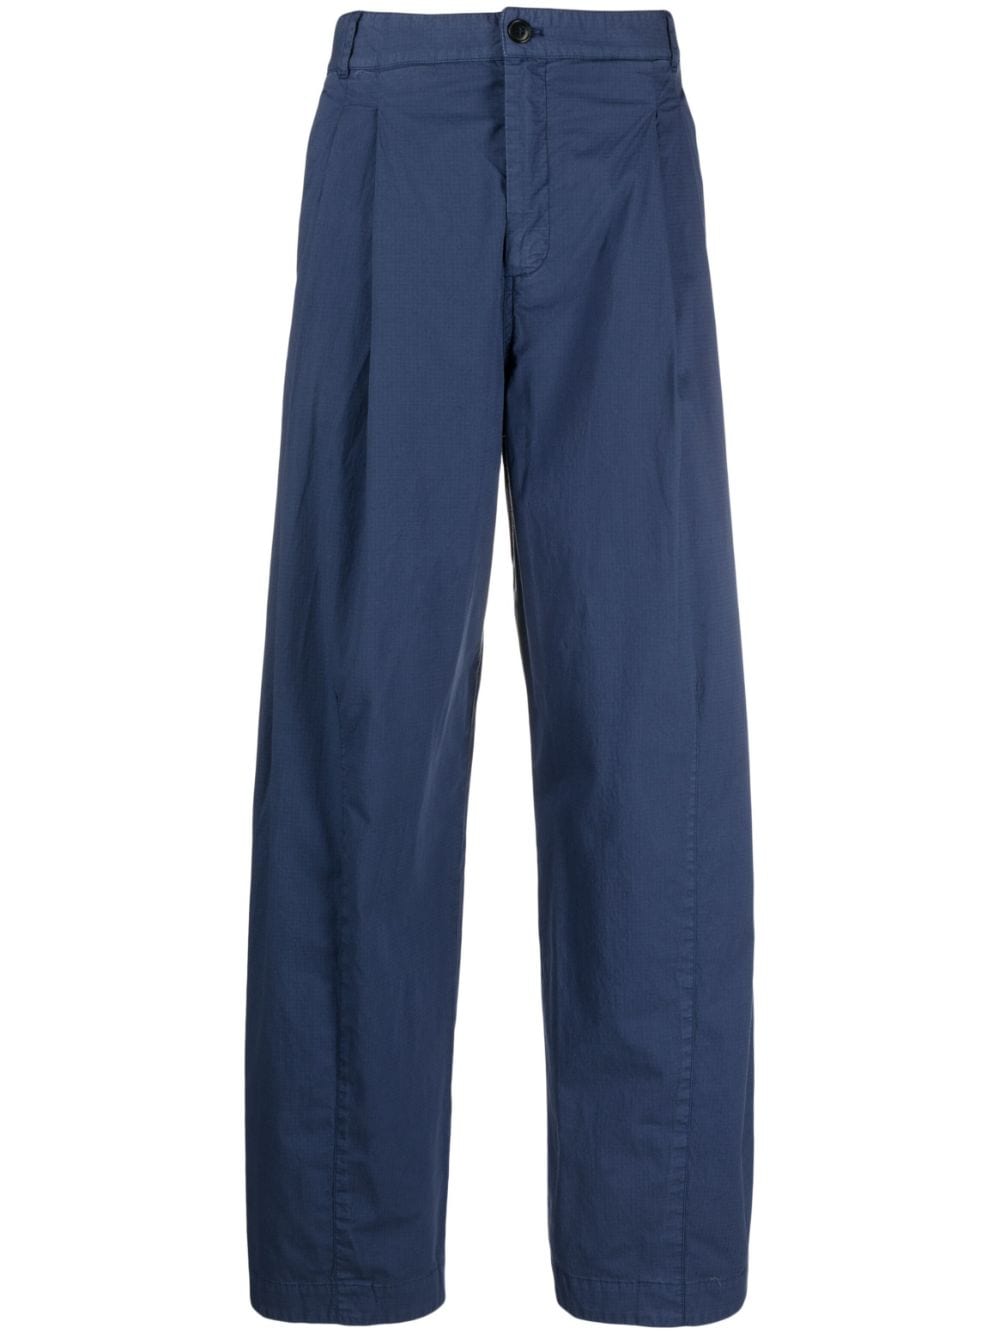 Claus pleated organic cotton trousers